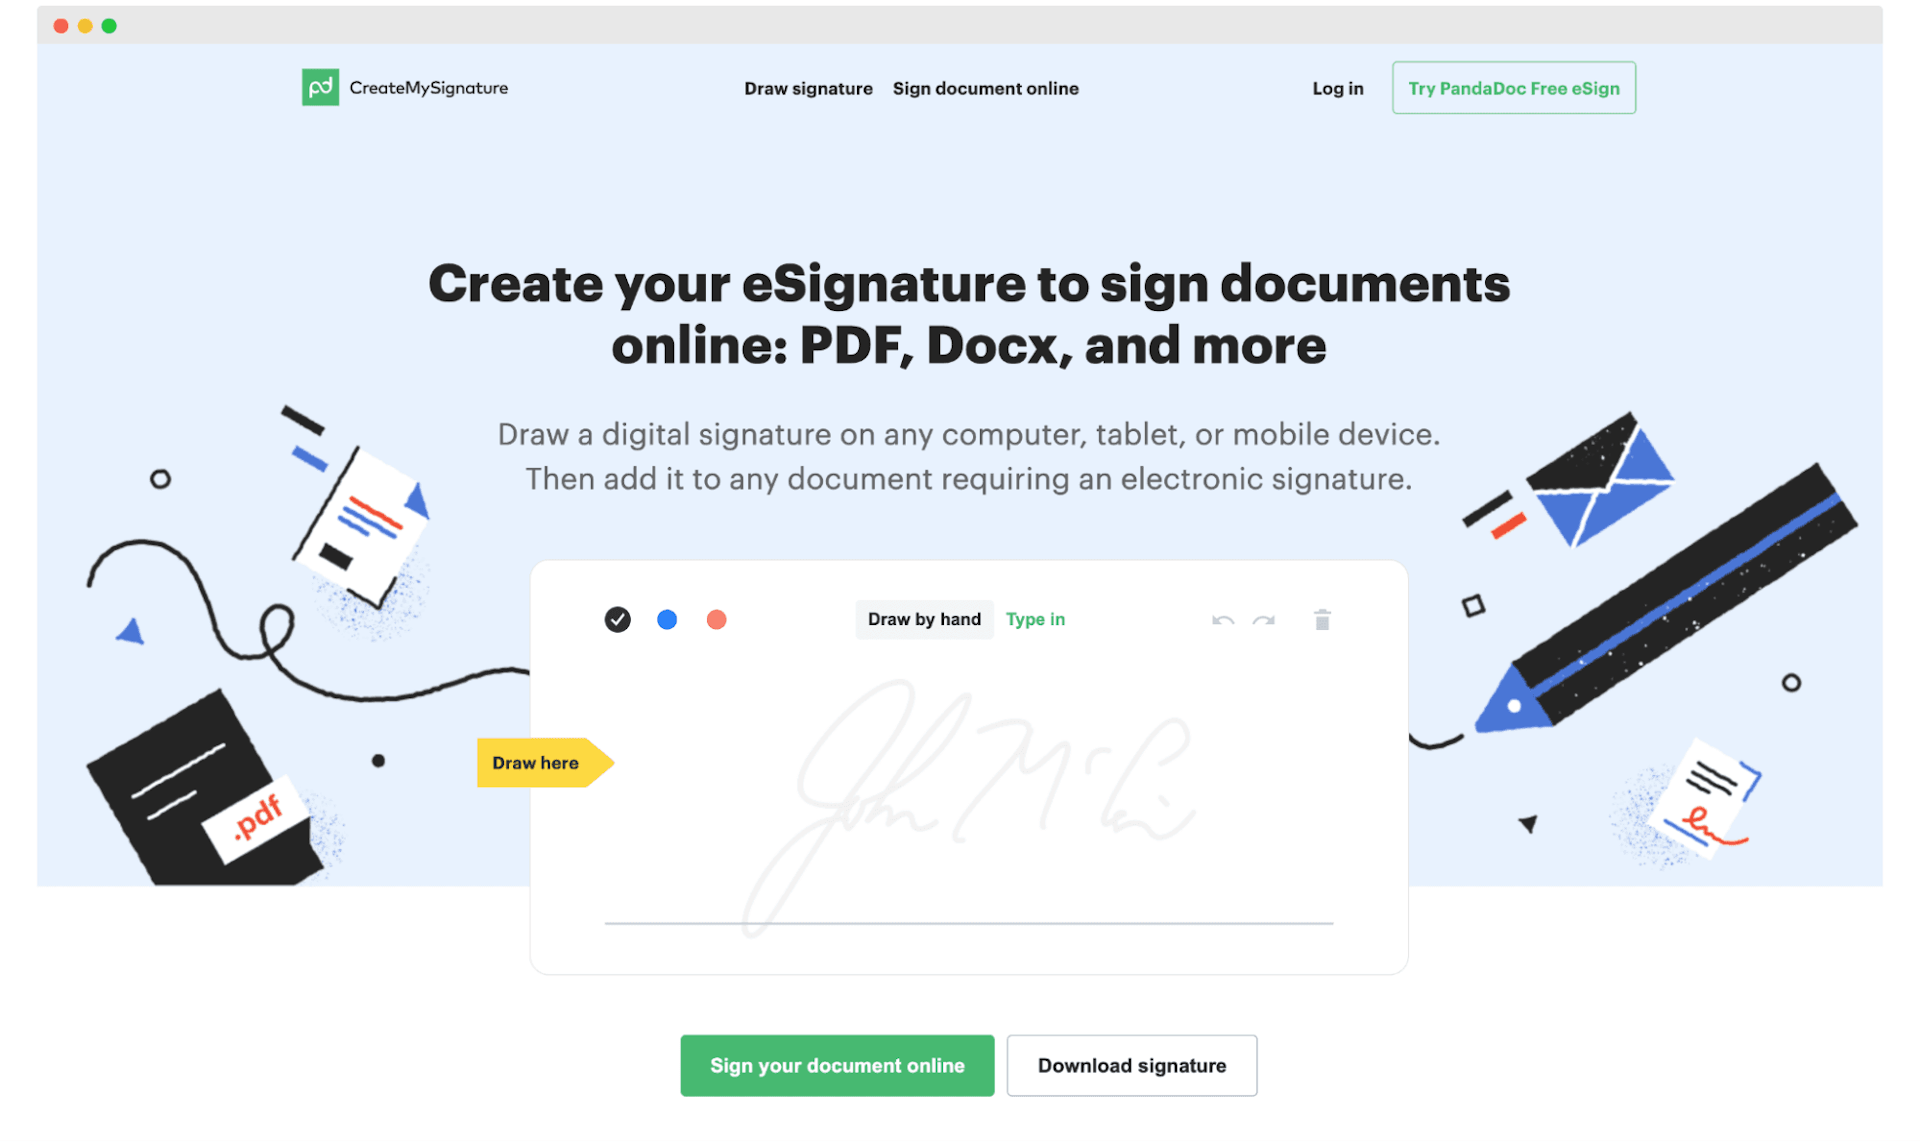 CreateMySignature as a solution to sign documents online.